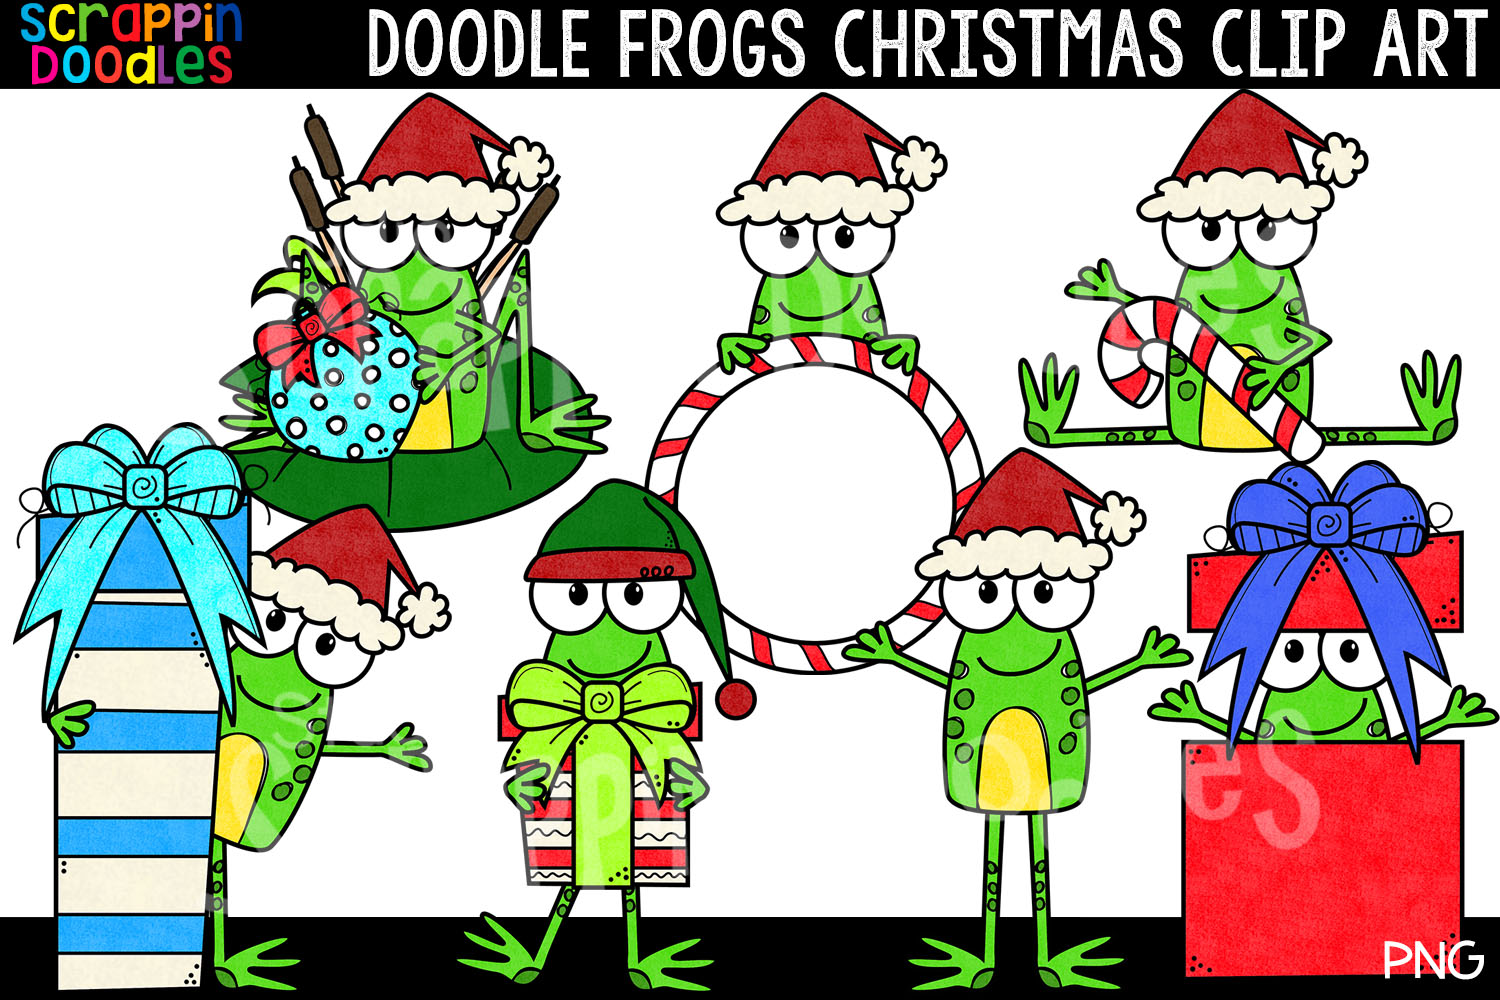 Doodle Frogs Christmas Clip Art Cute Christmas Frog (391297